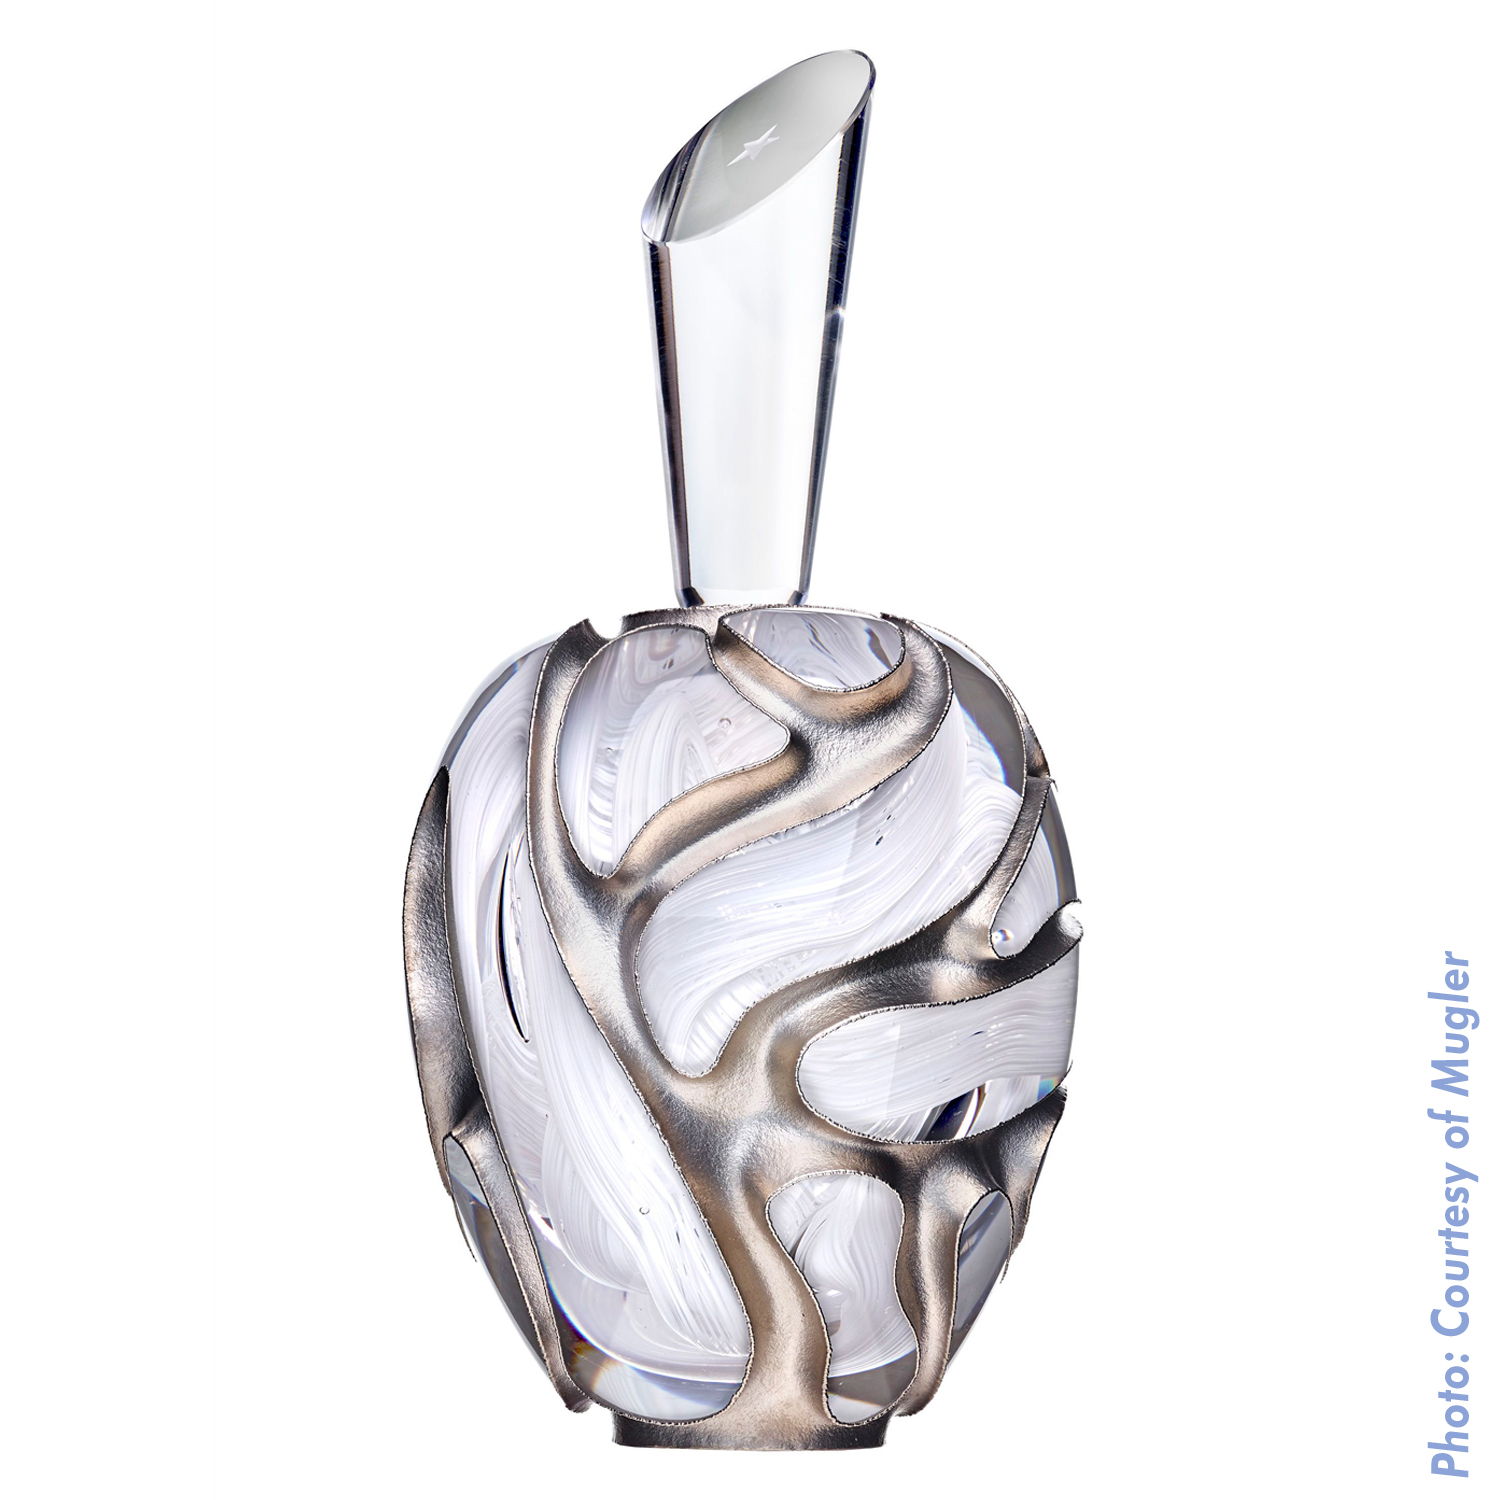 Thierry Mugler Angel Perfume Collector's Limited Edition Bottle 2018 2017 Clouds Cloud Egg Eggs Nuages Unique Art hand Glass Mouthblown Jean-Jacques Urcun Frederic Alary White Swirl Nature Silver